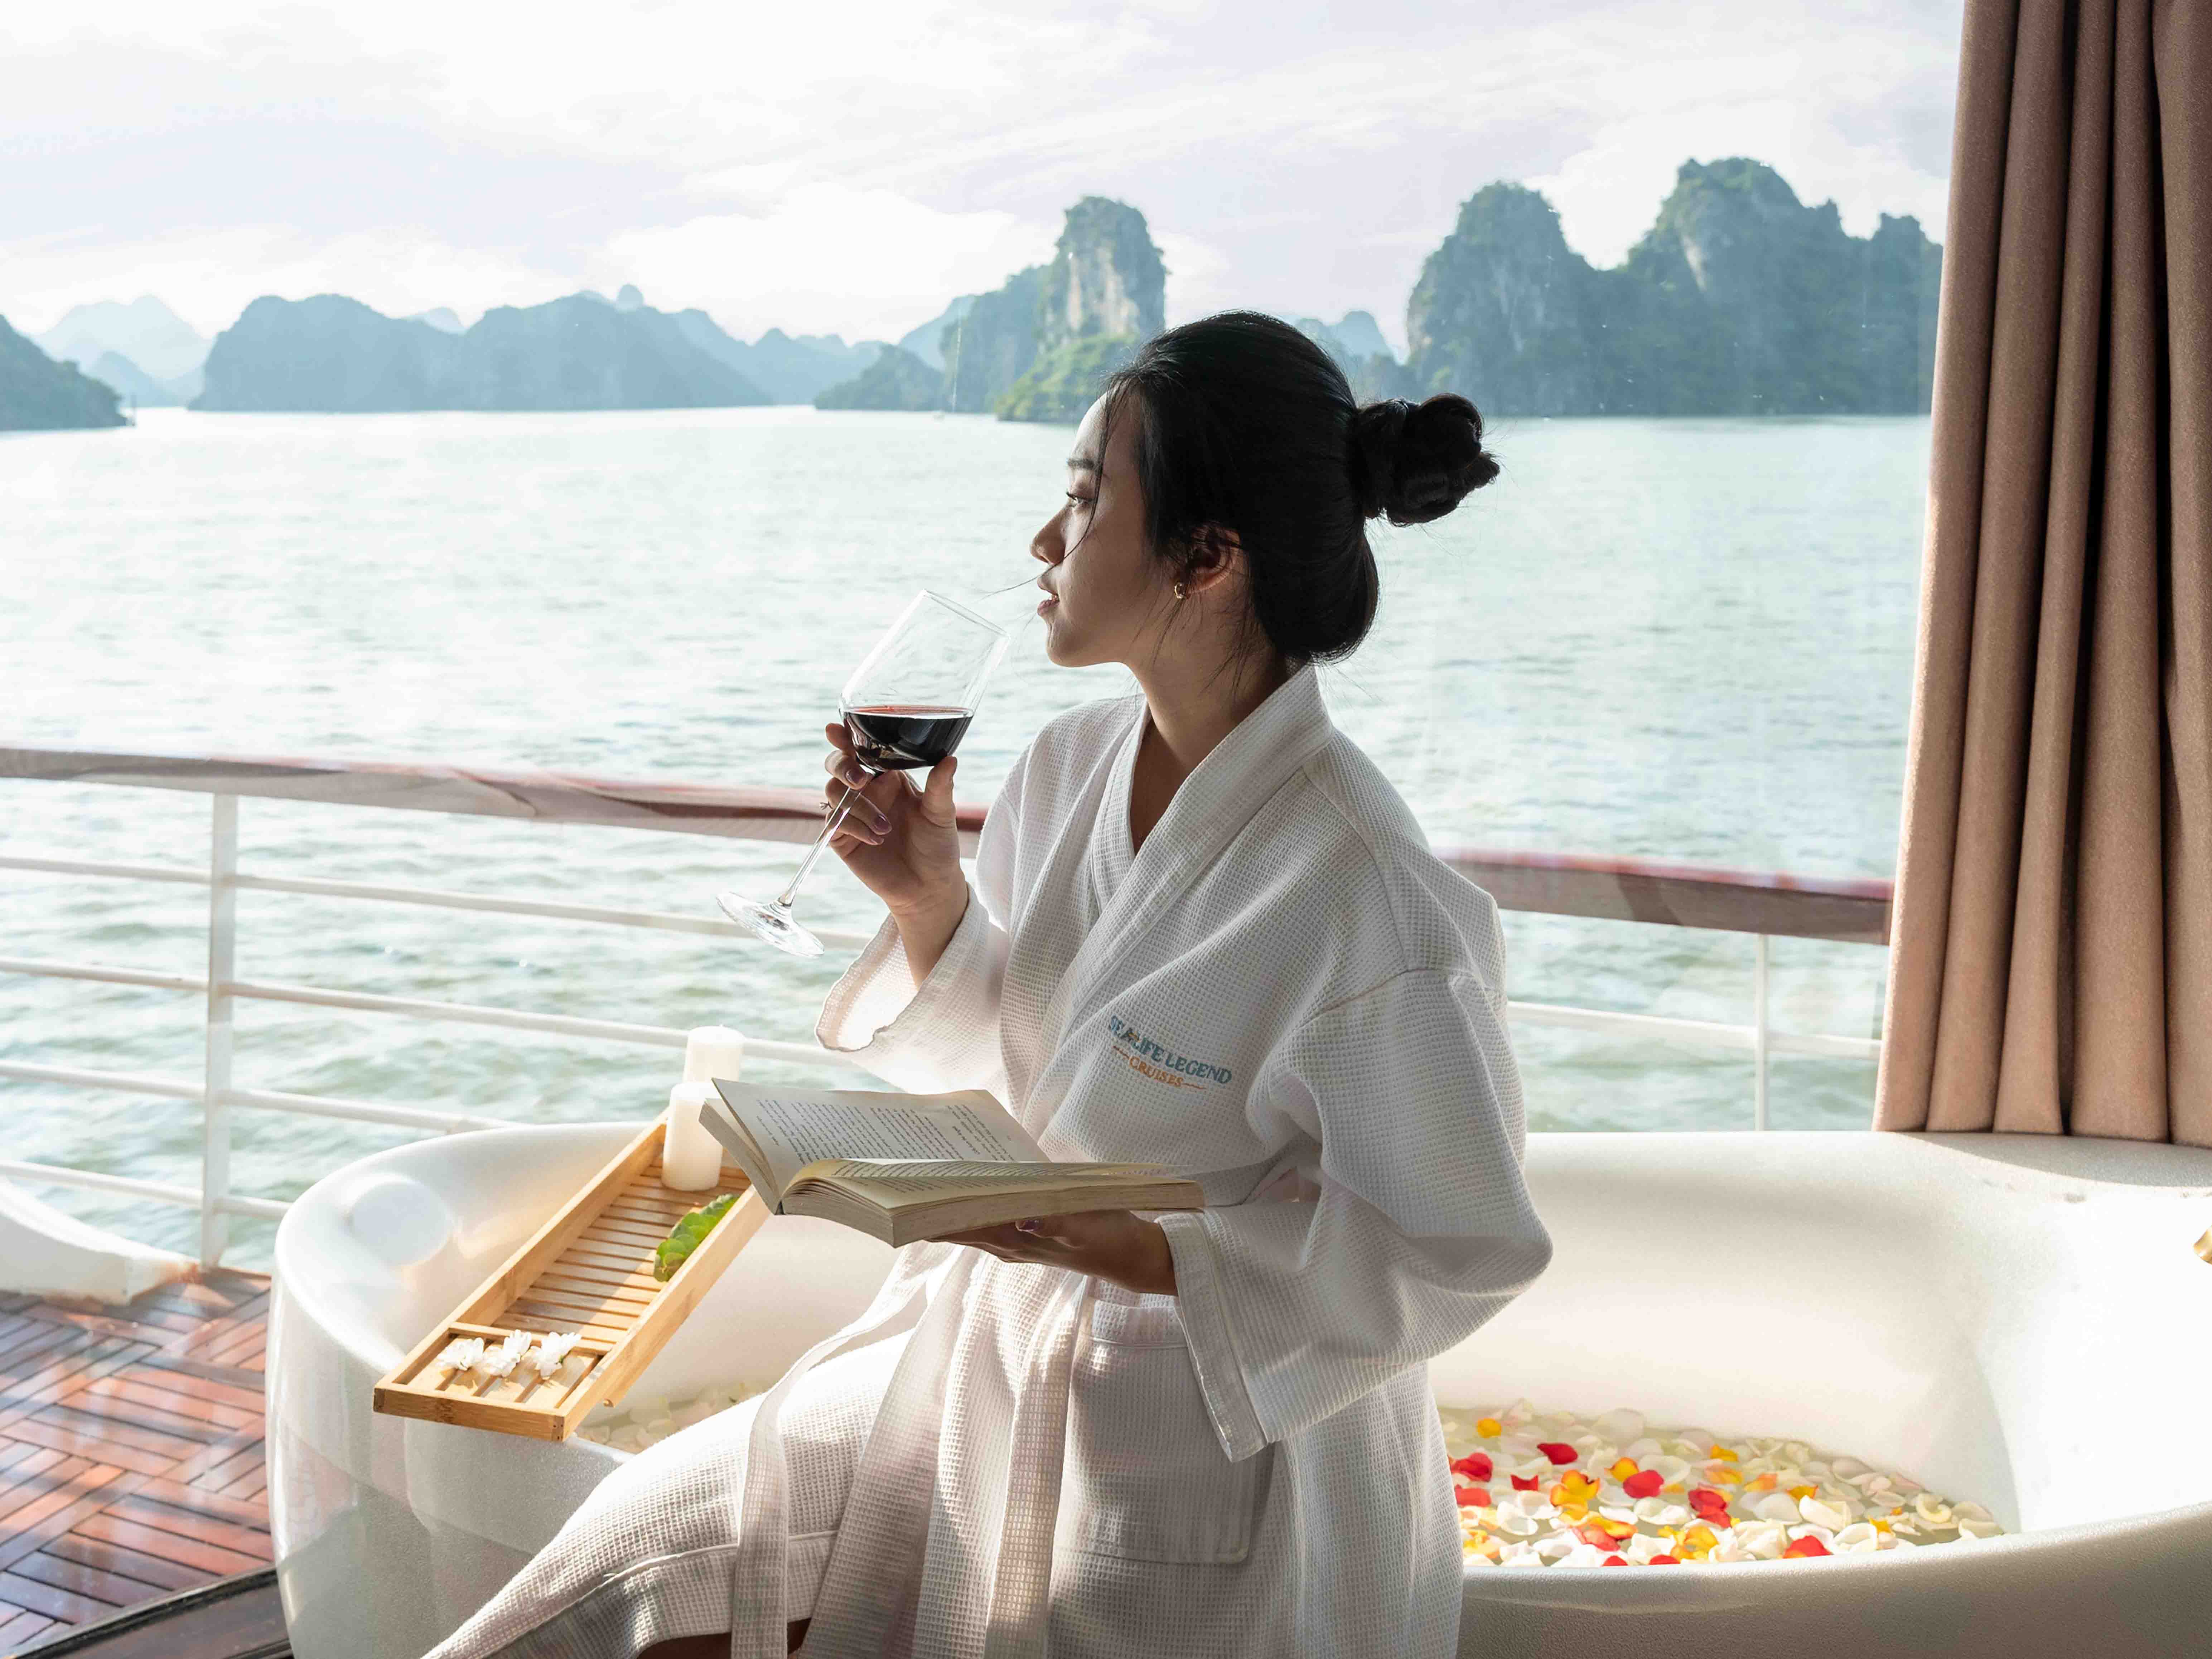 Ready to sail away to relaxation, Unwind with luxurious spa treatments aboard Halong Bay